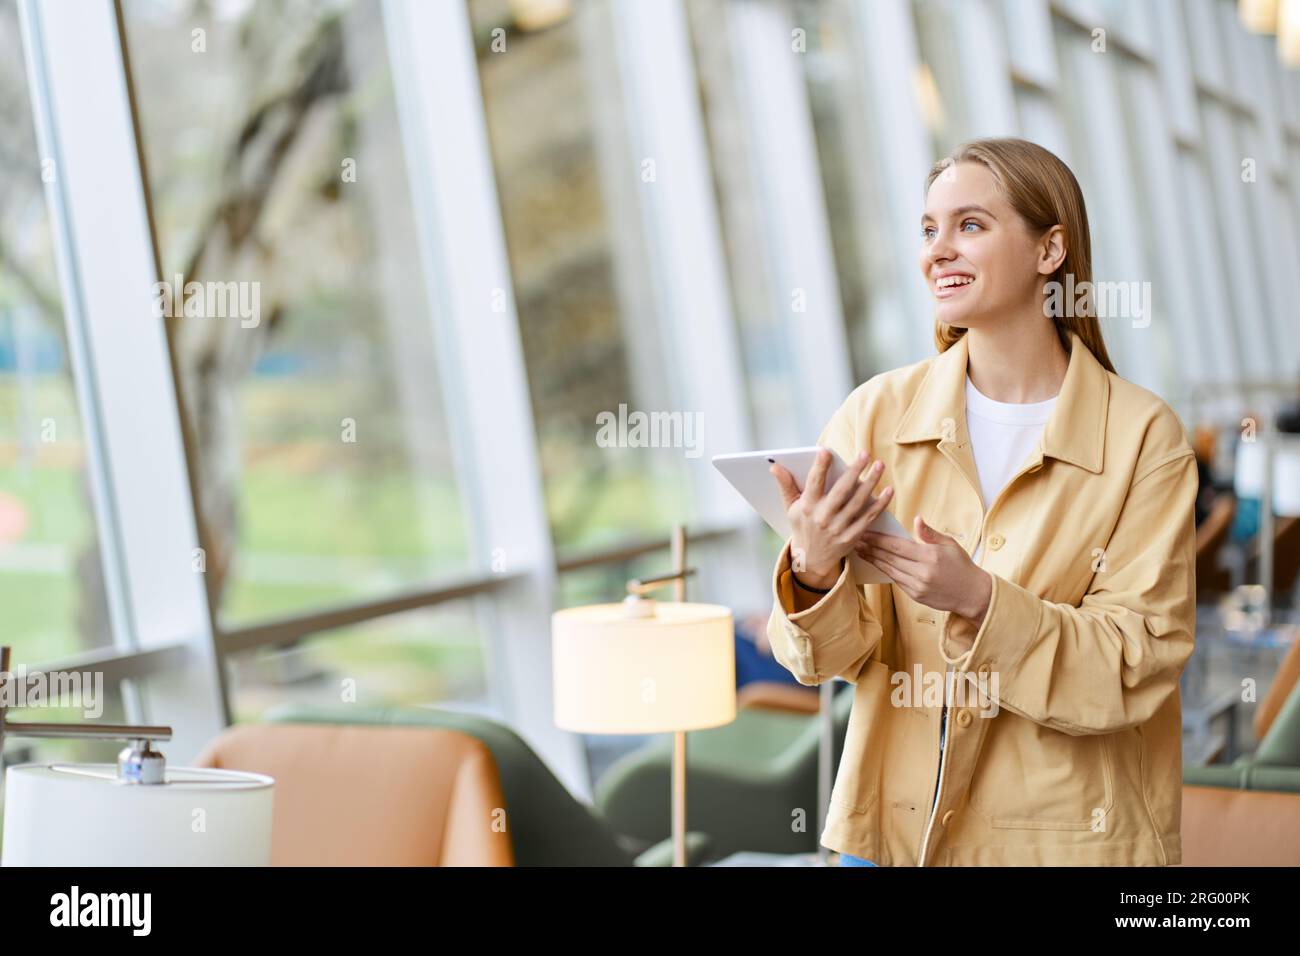 Happy girl student using digital tablet modern tech device. Copy space Stock Photo